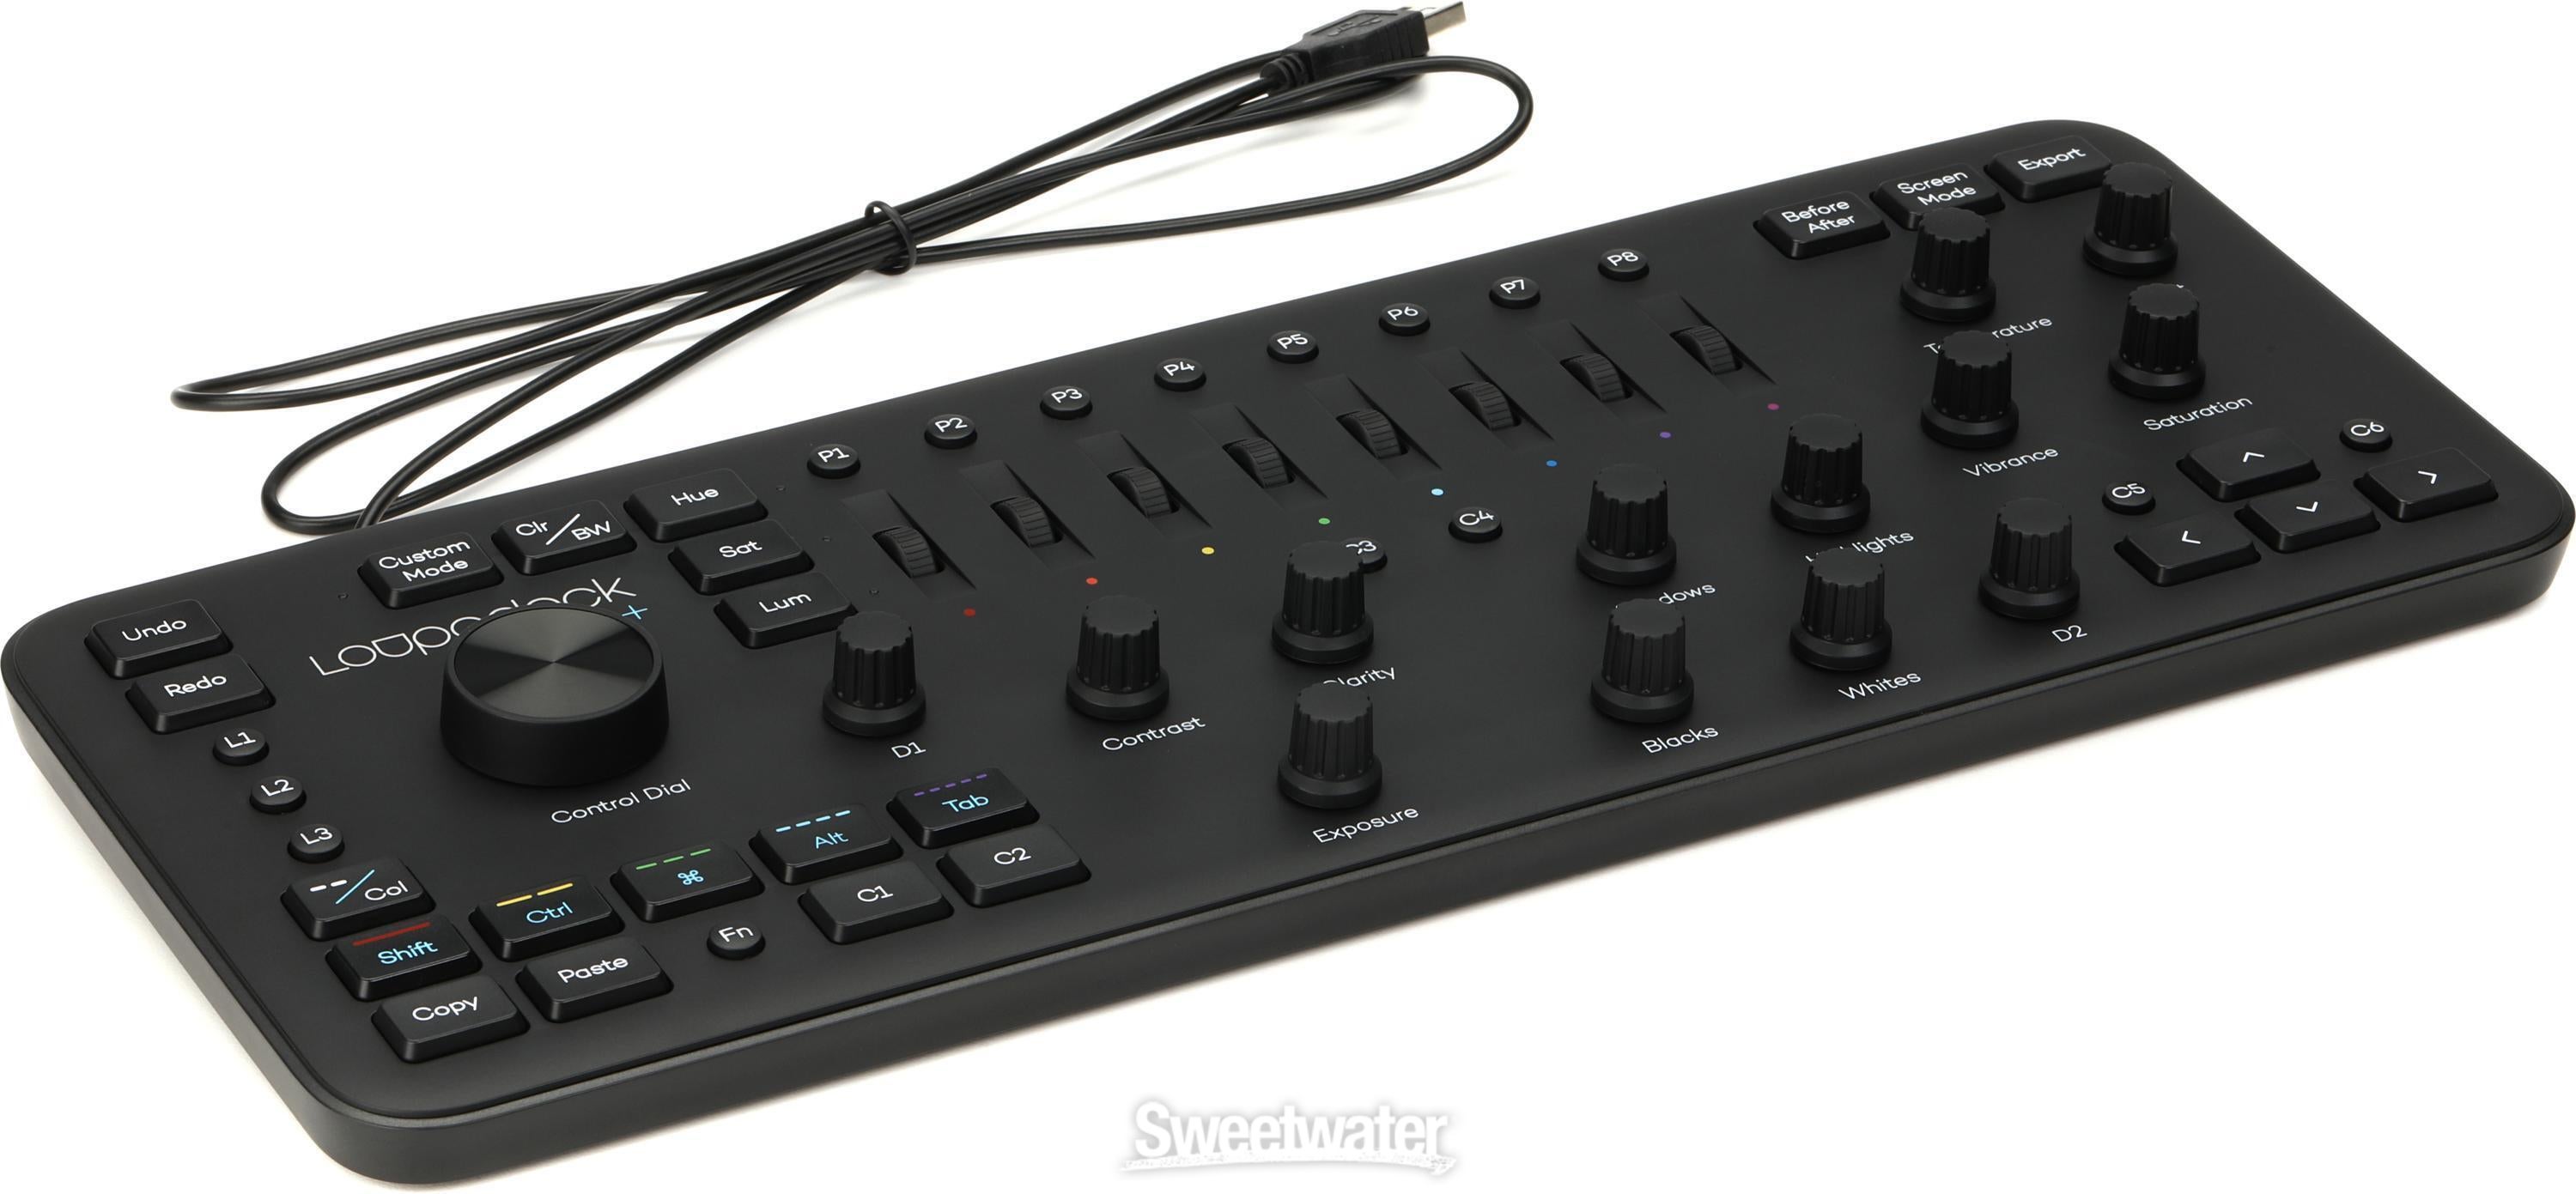 Loupedeck Plus Customizable Editing Console | Sweetwater